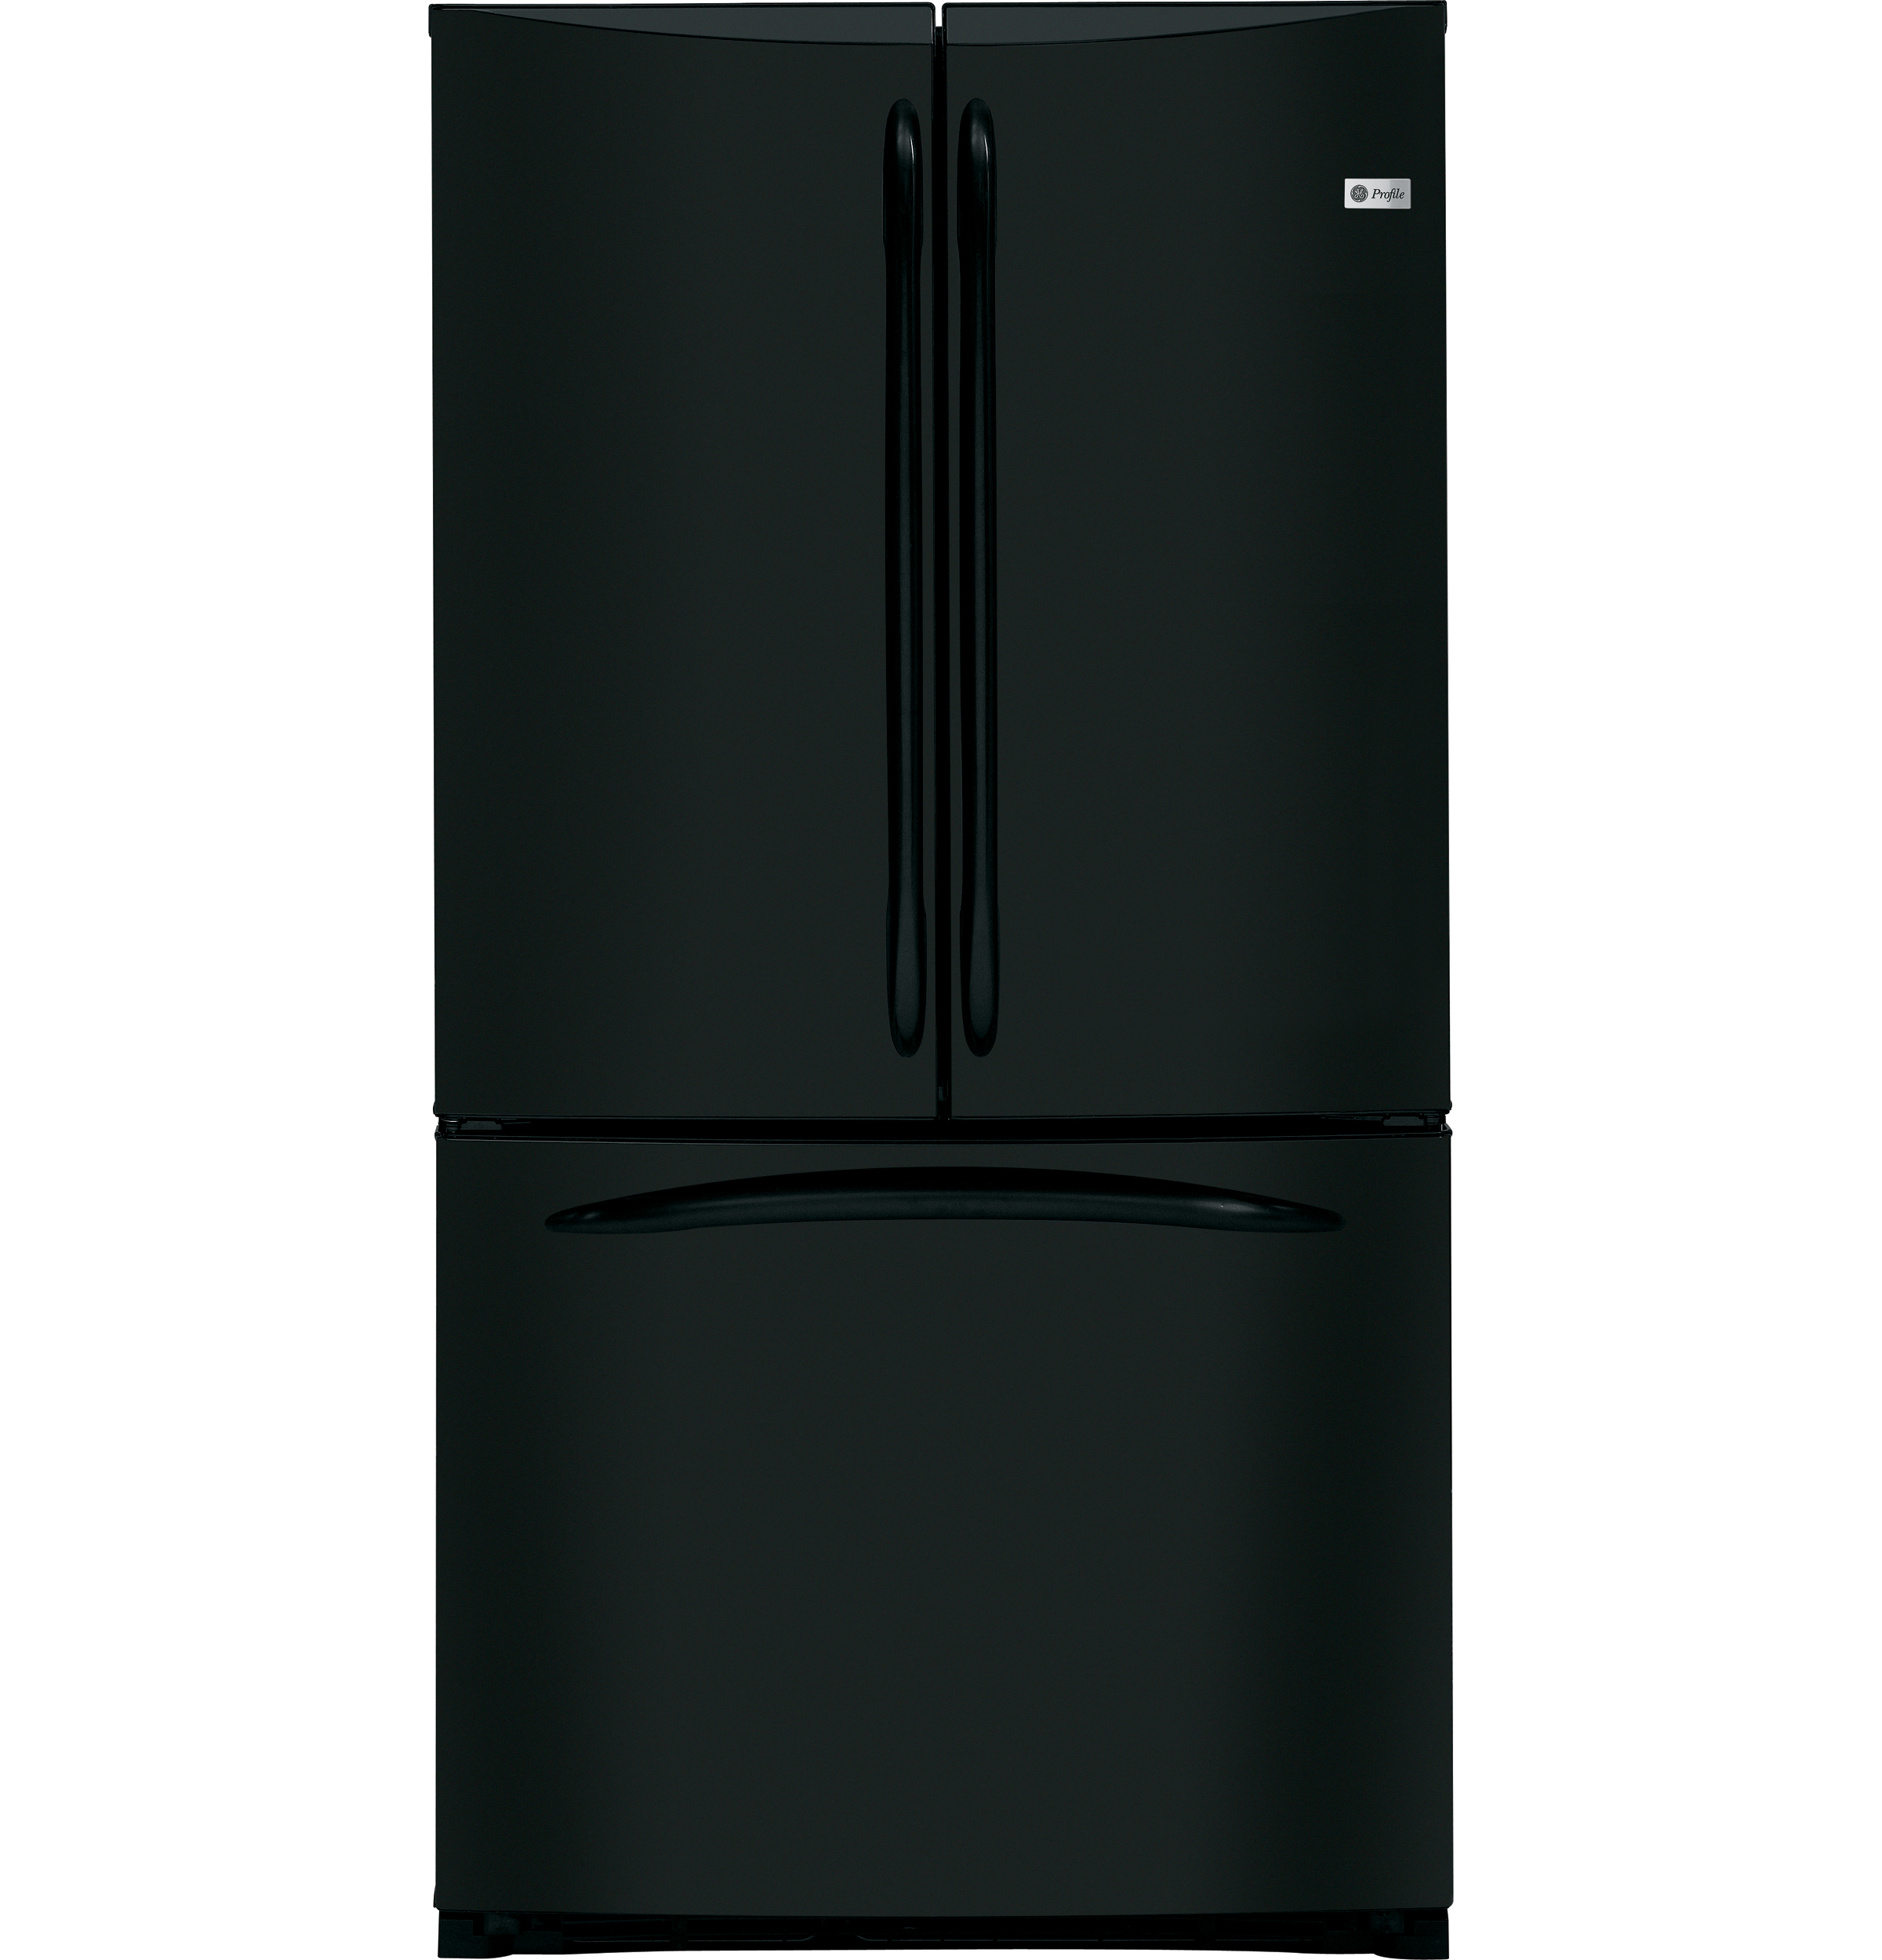 GE Profile™ Series 20.7 Cu. Ft. Counter-Depth French-Door Refrigerator with Icemaker